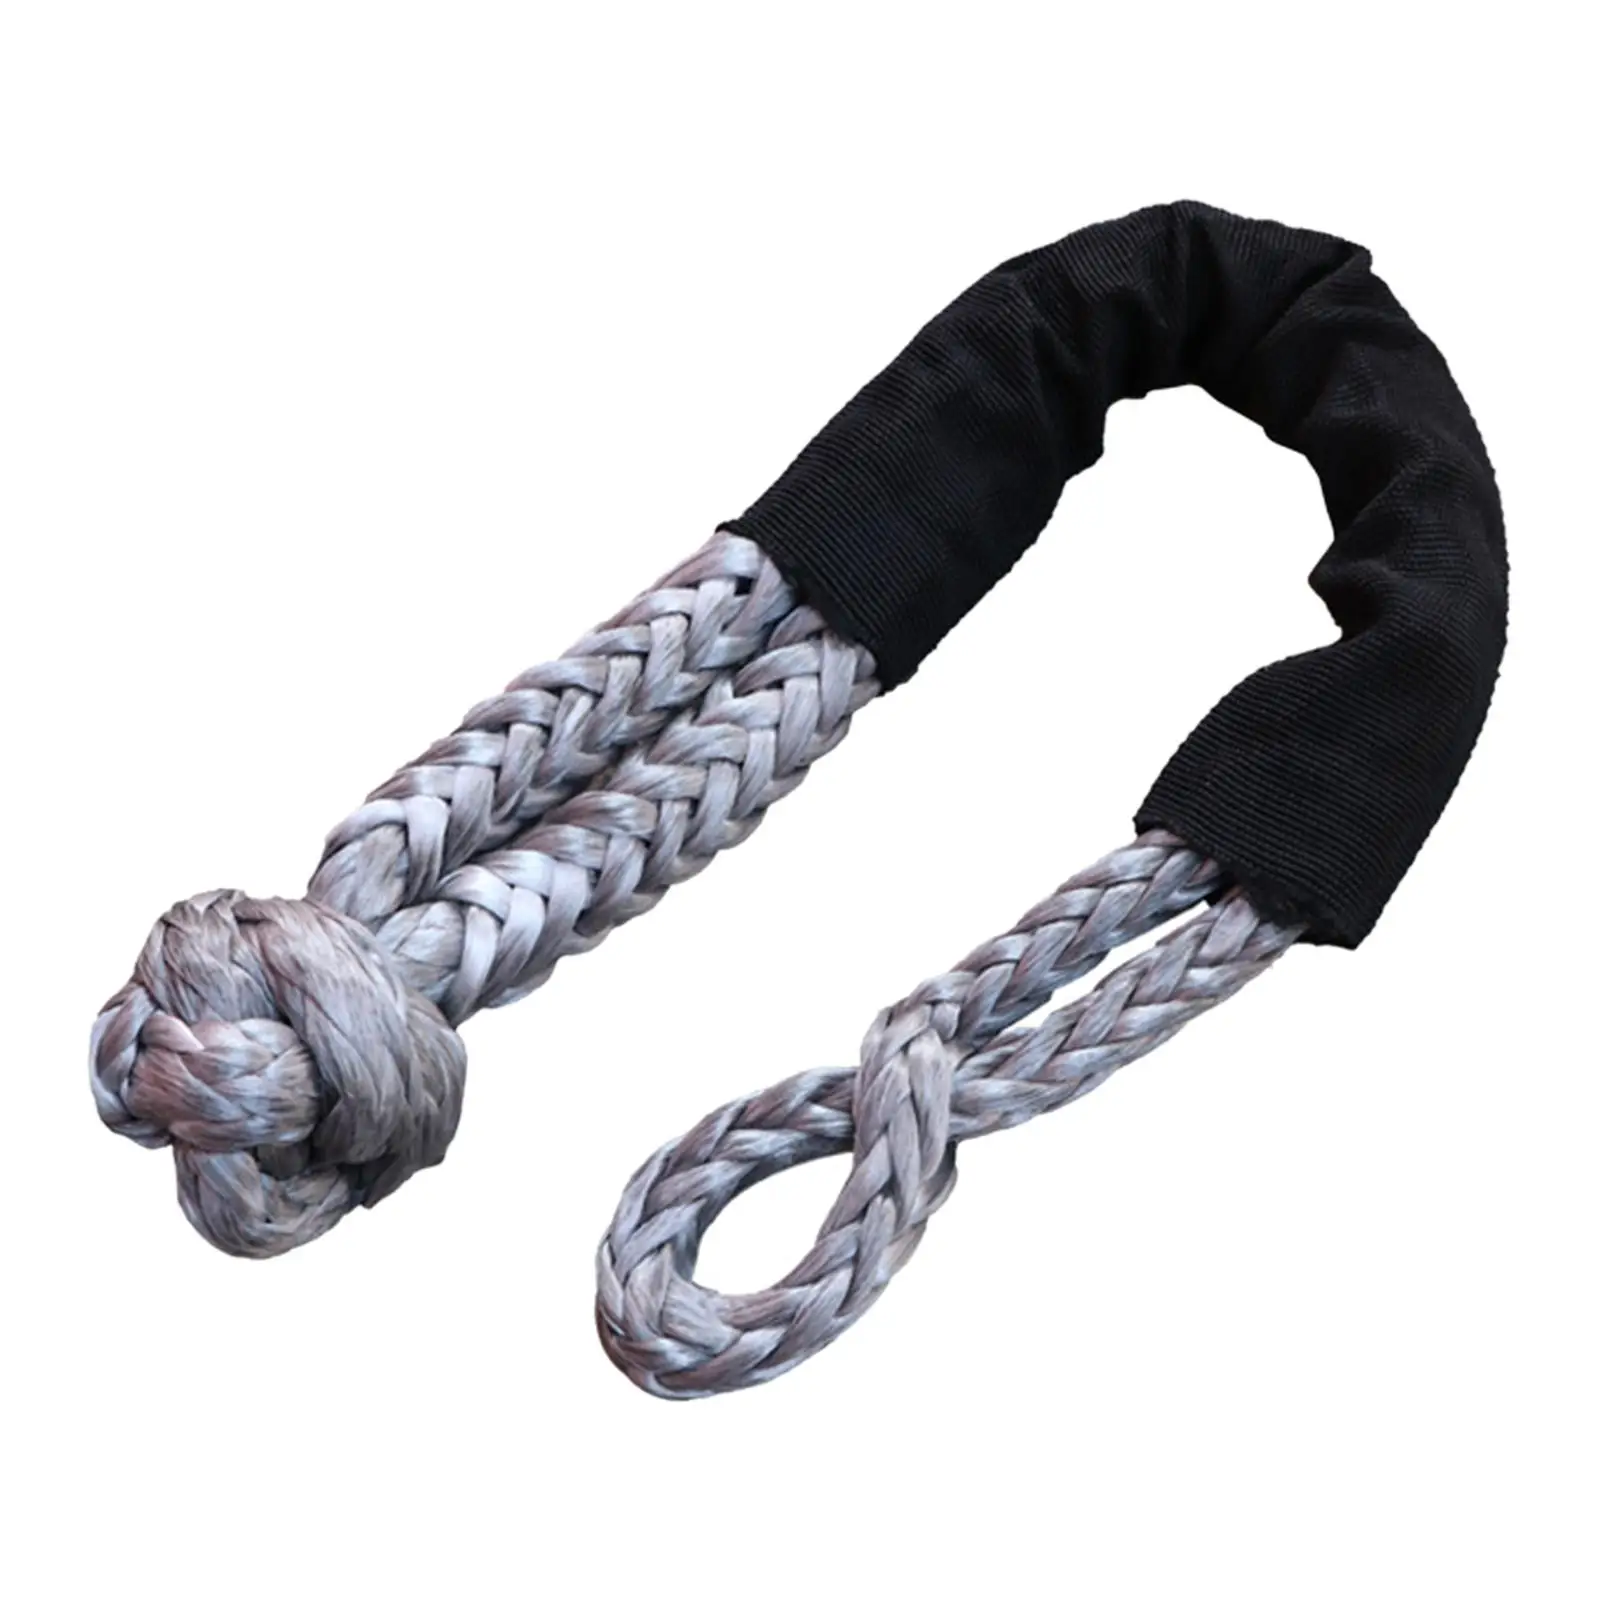 Soft Shackle Oxford Cloth Fiber Strong Car Breakdowns High Strength Tow Rope for ATV UTV trucks Towing SUV Winches